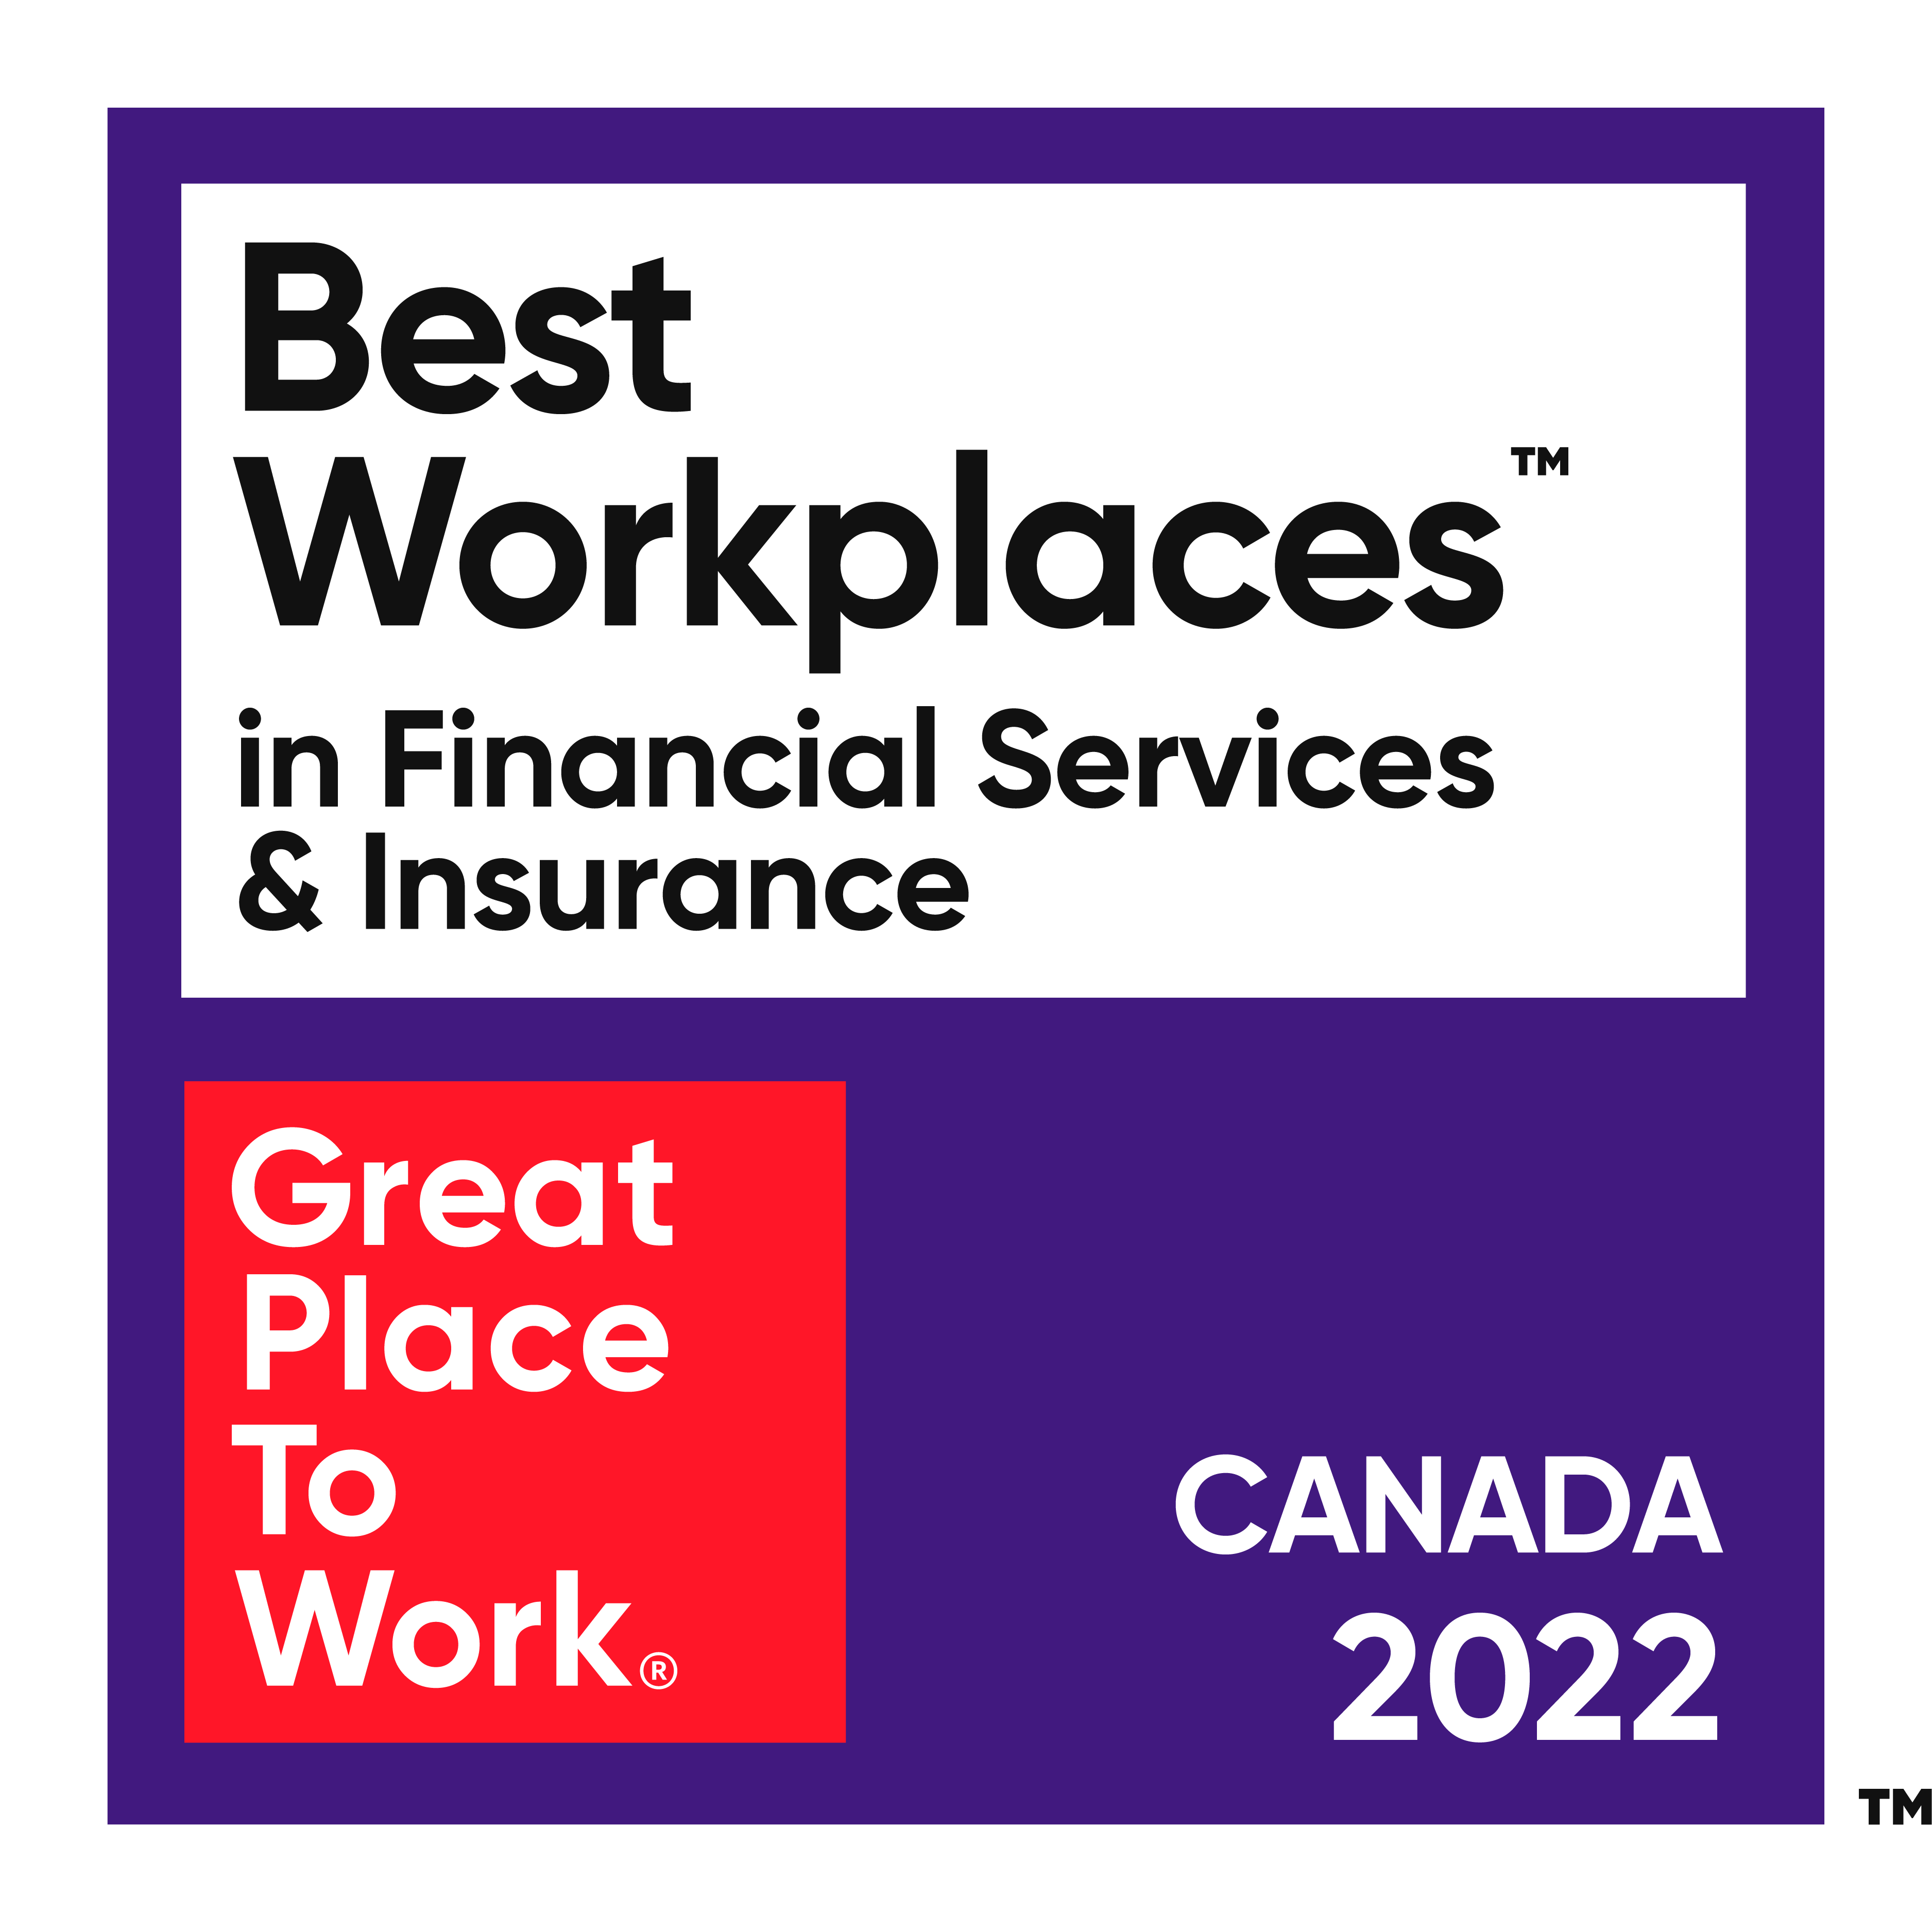 Best Workplaces Canada 2022